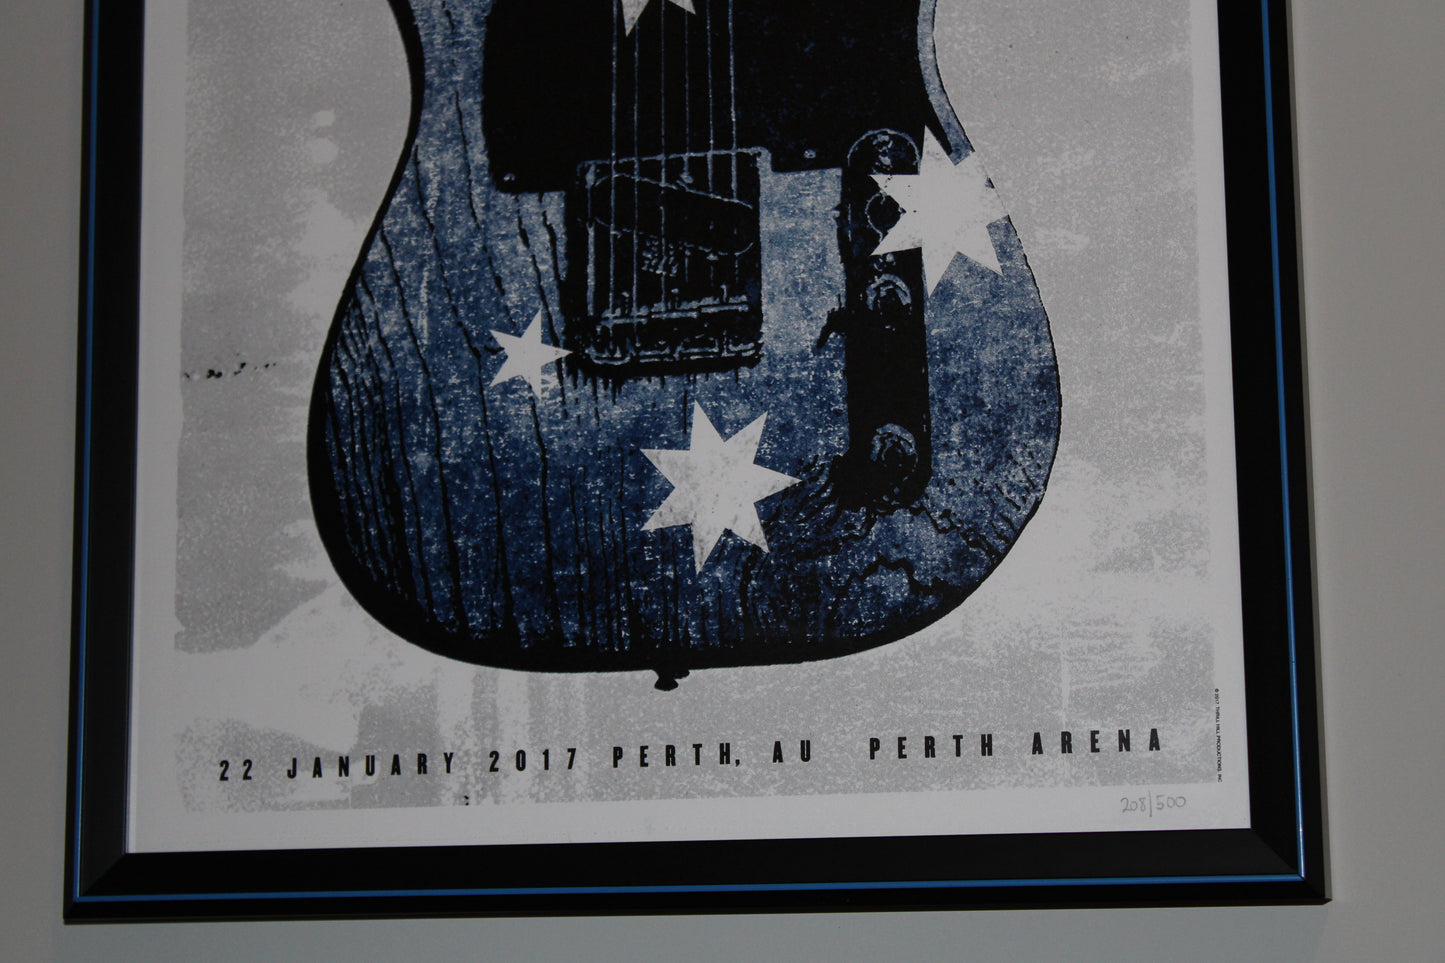 Bruce Springsteen - Original Lithograph - "Summer 2017" in Perth, AU - Final Shows of The River Tour - Collectible